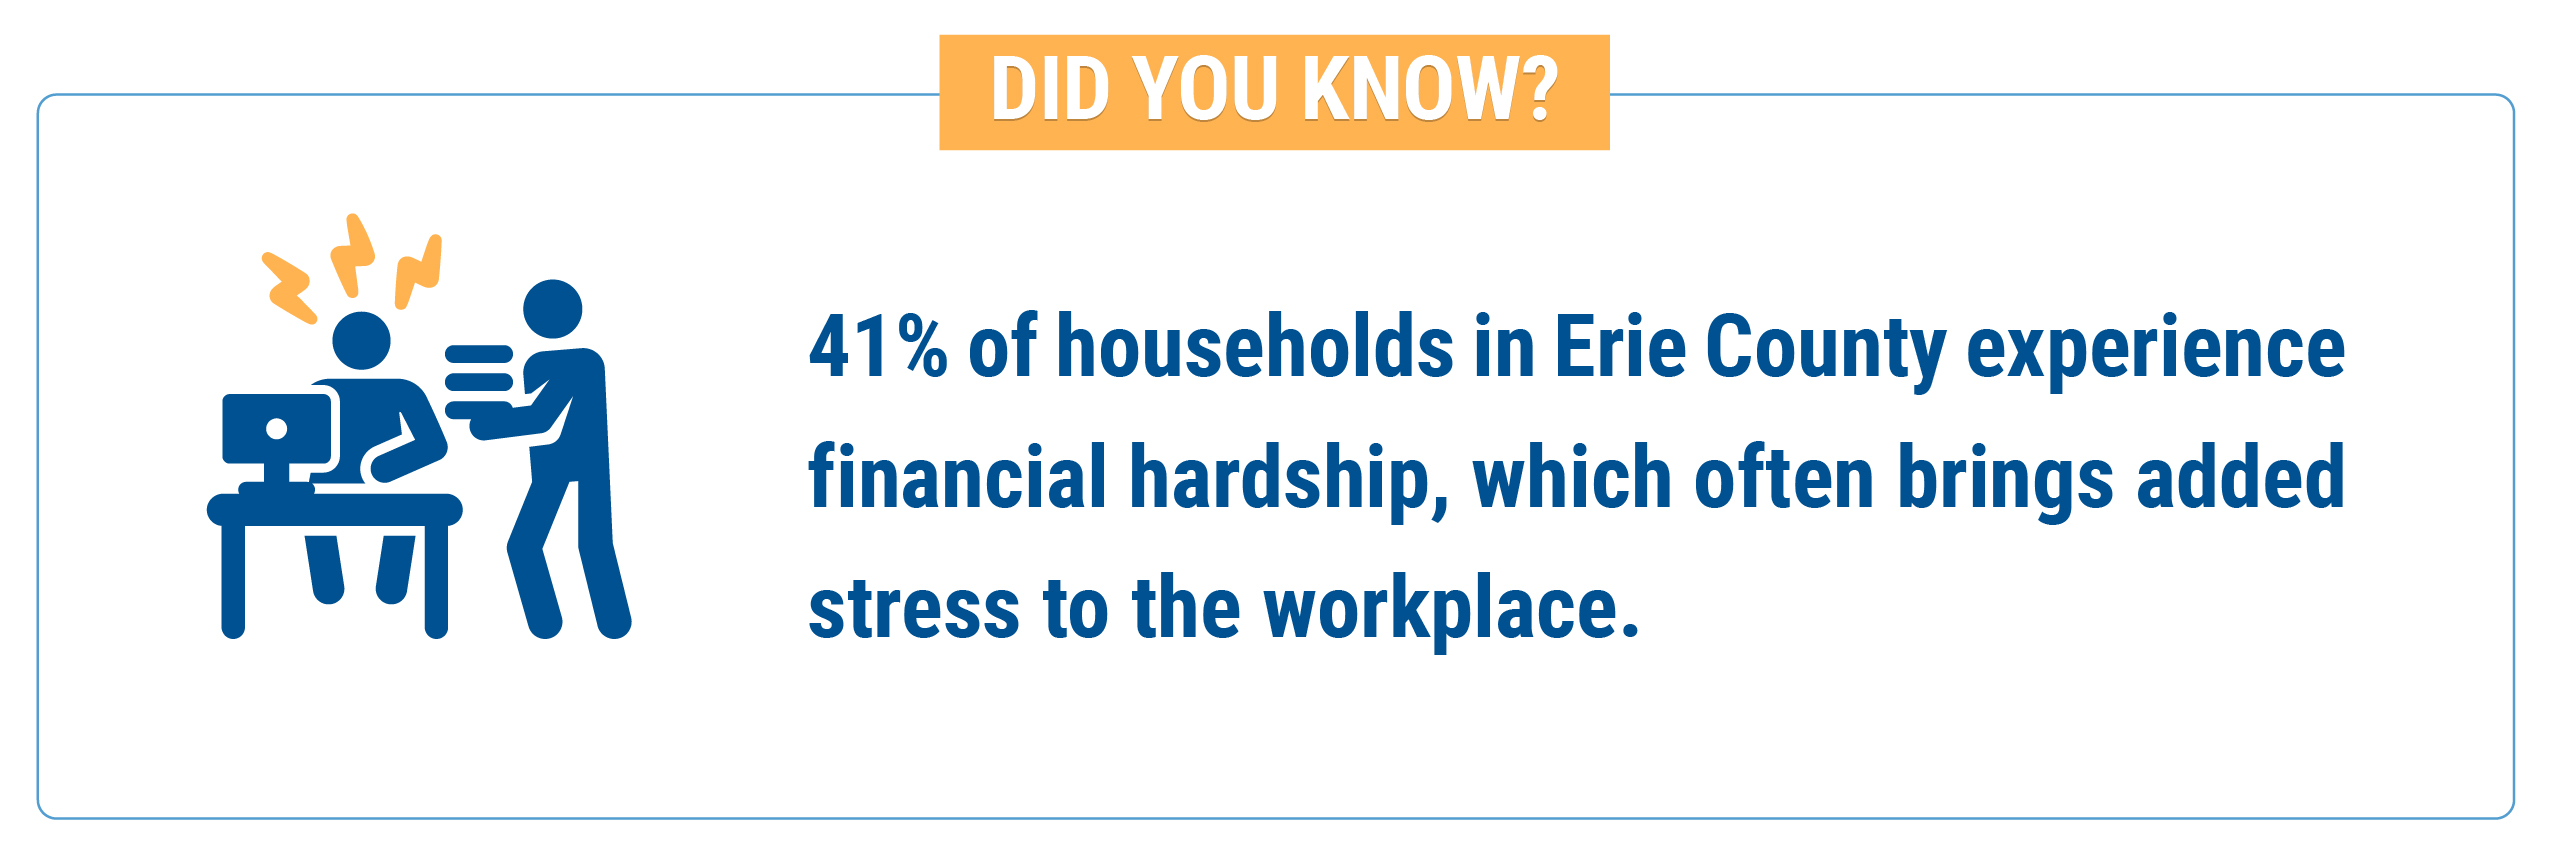 Did you know: 41% of households in Erie County experience financial hardship, which often brings added stress to the workplace.